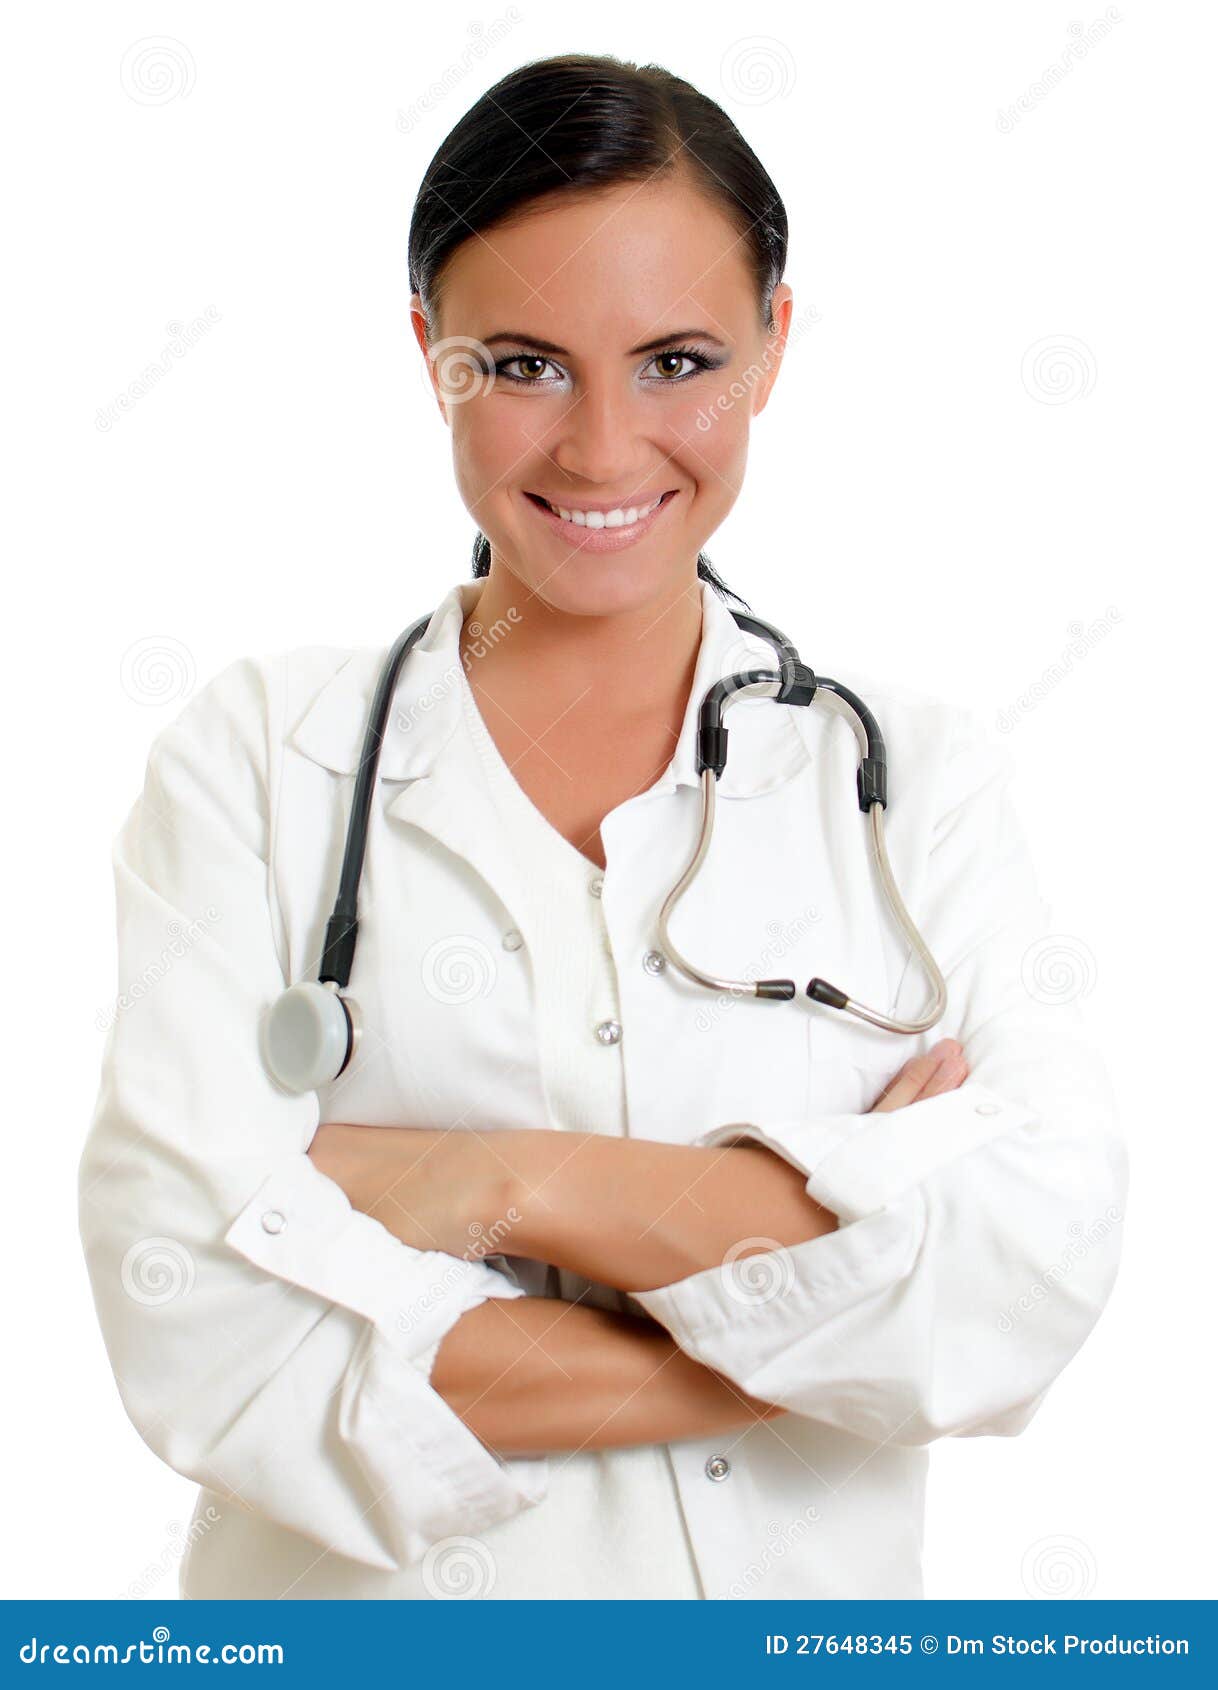 Attractive doctor with arms crossed. Isolated on white.